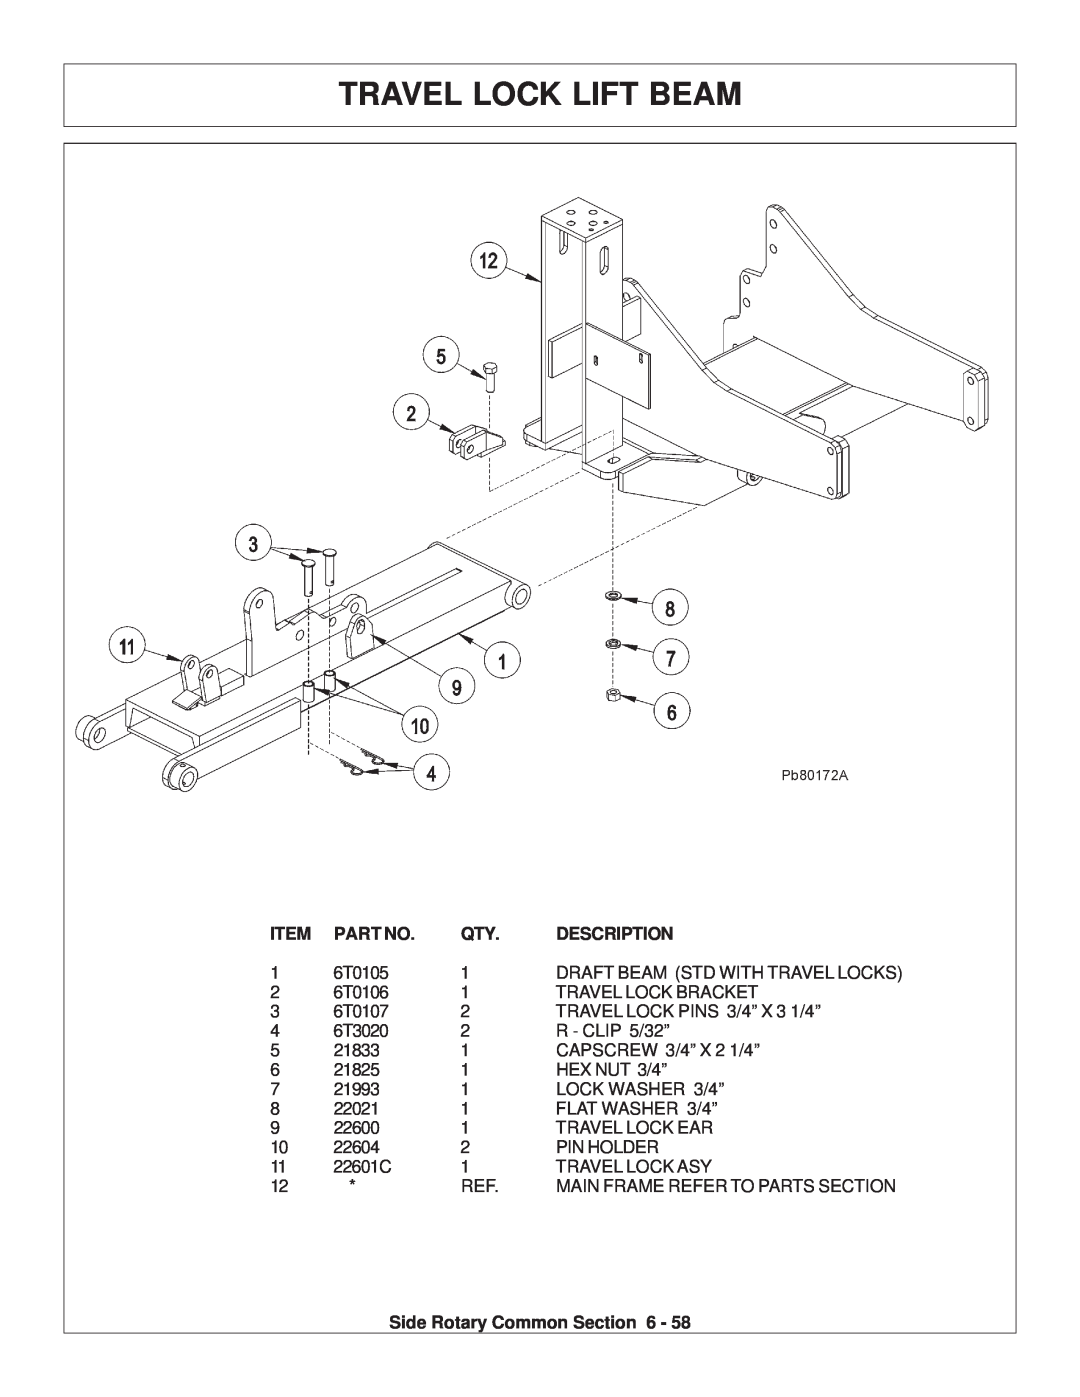 Tiger Products Co., Ltd TS 100A manual Travel Lock Lift Beam, Description, Side Rotary Common 